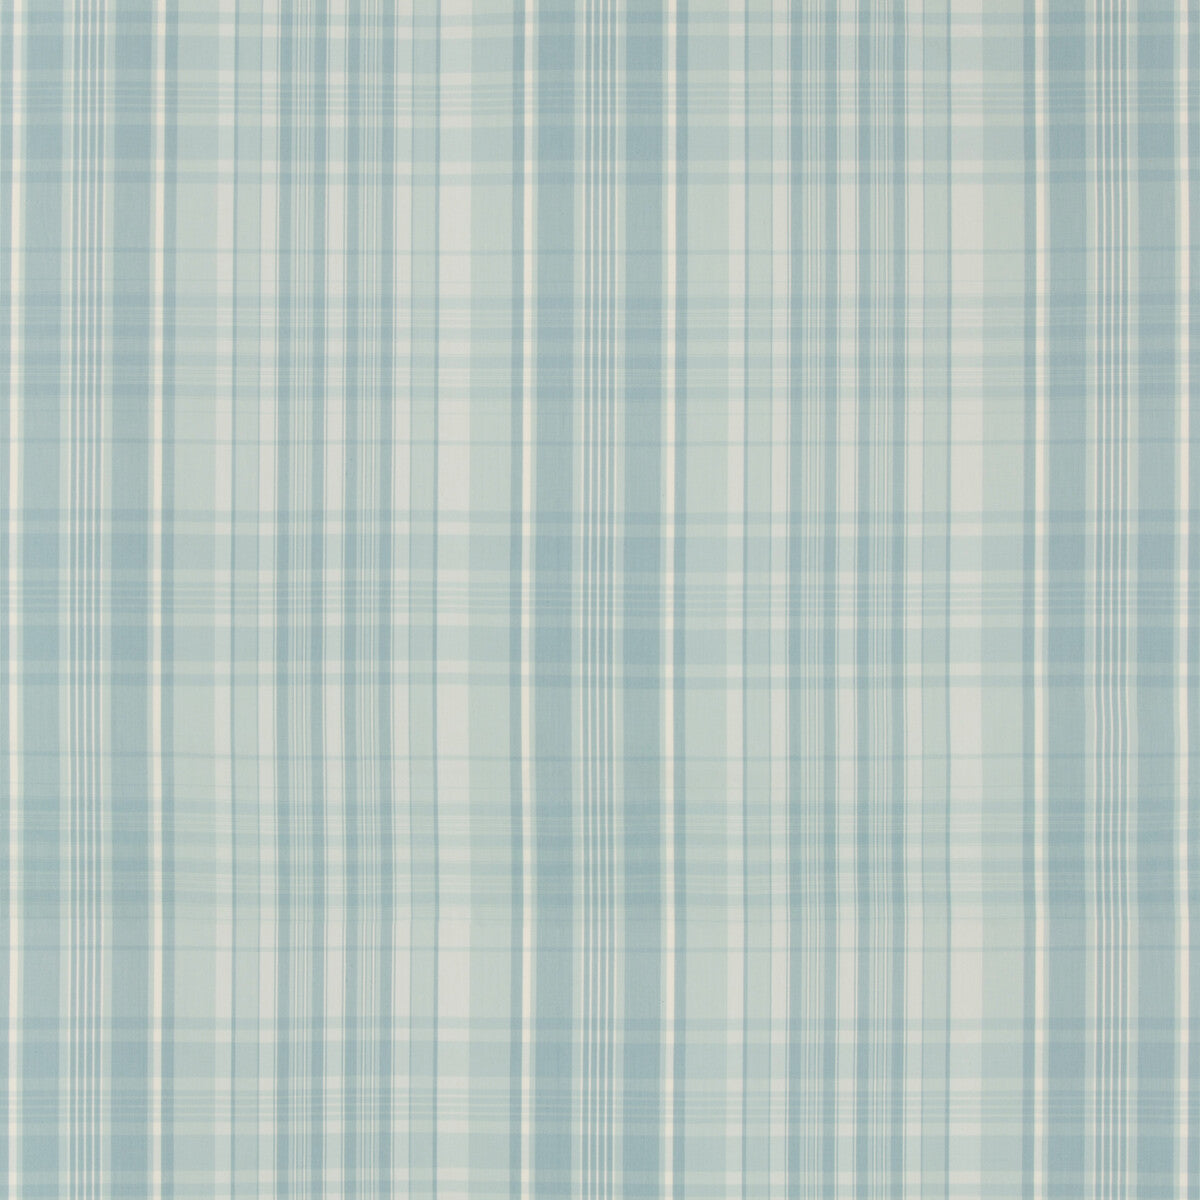 Guernsey Check fabric in aqua color - pattern 8019101.13.0 - by Brunschwig &amp; Fils in the Normant Checks And Stripes collection